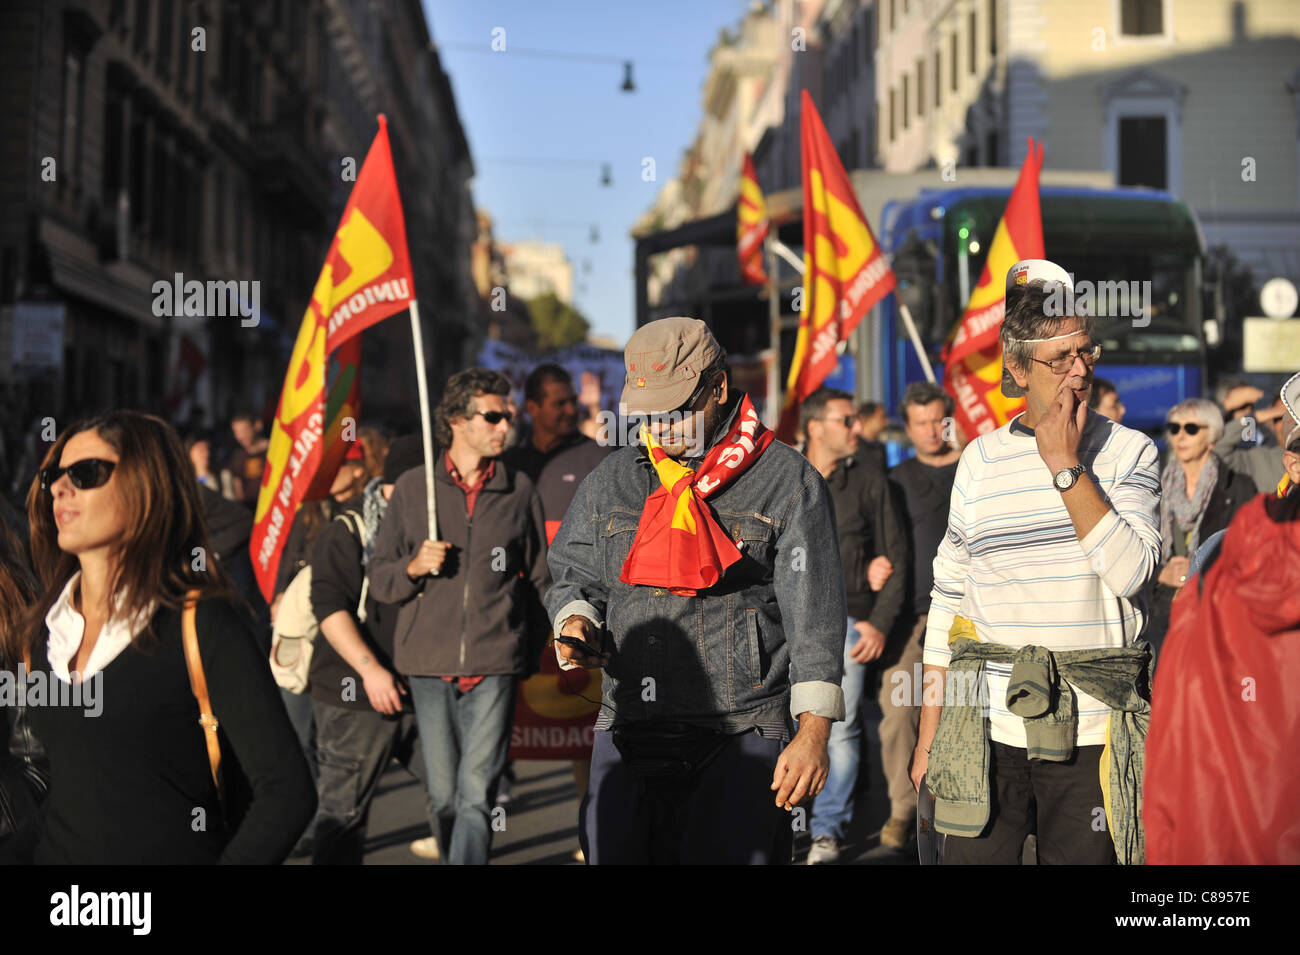 Cobas in Rome. Indignants Protest in Rome turns violent Stock Photo